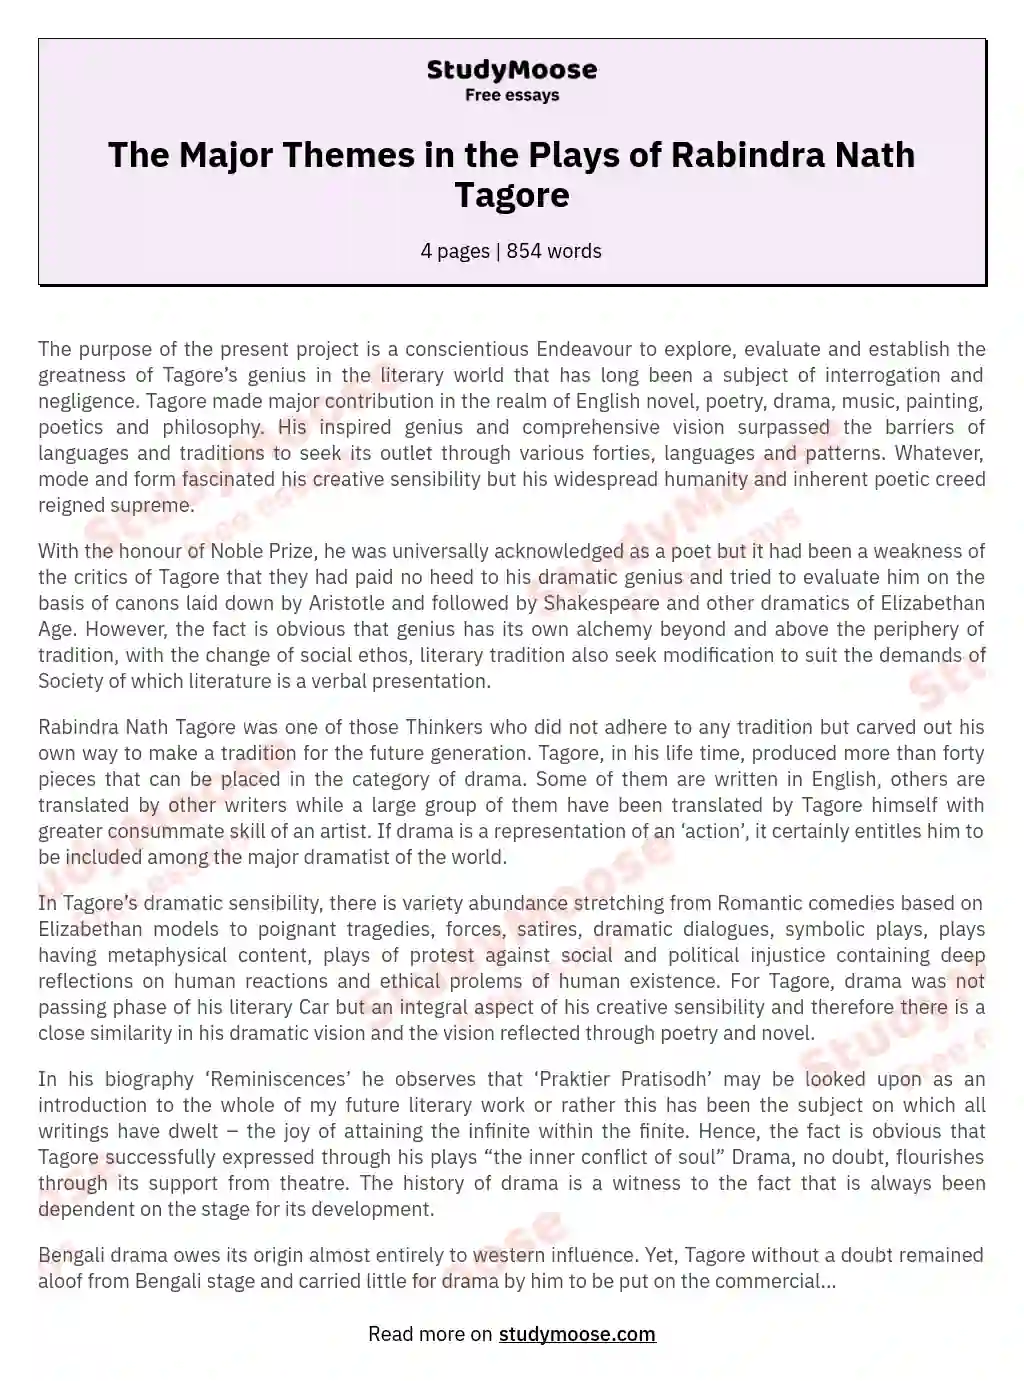 The Major Themes in the Plays of Rabindra Nath Tagore essay